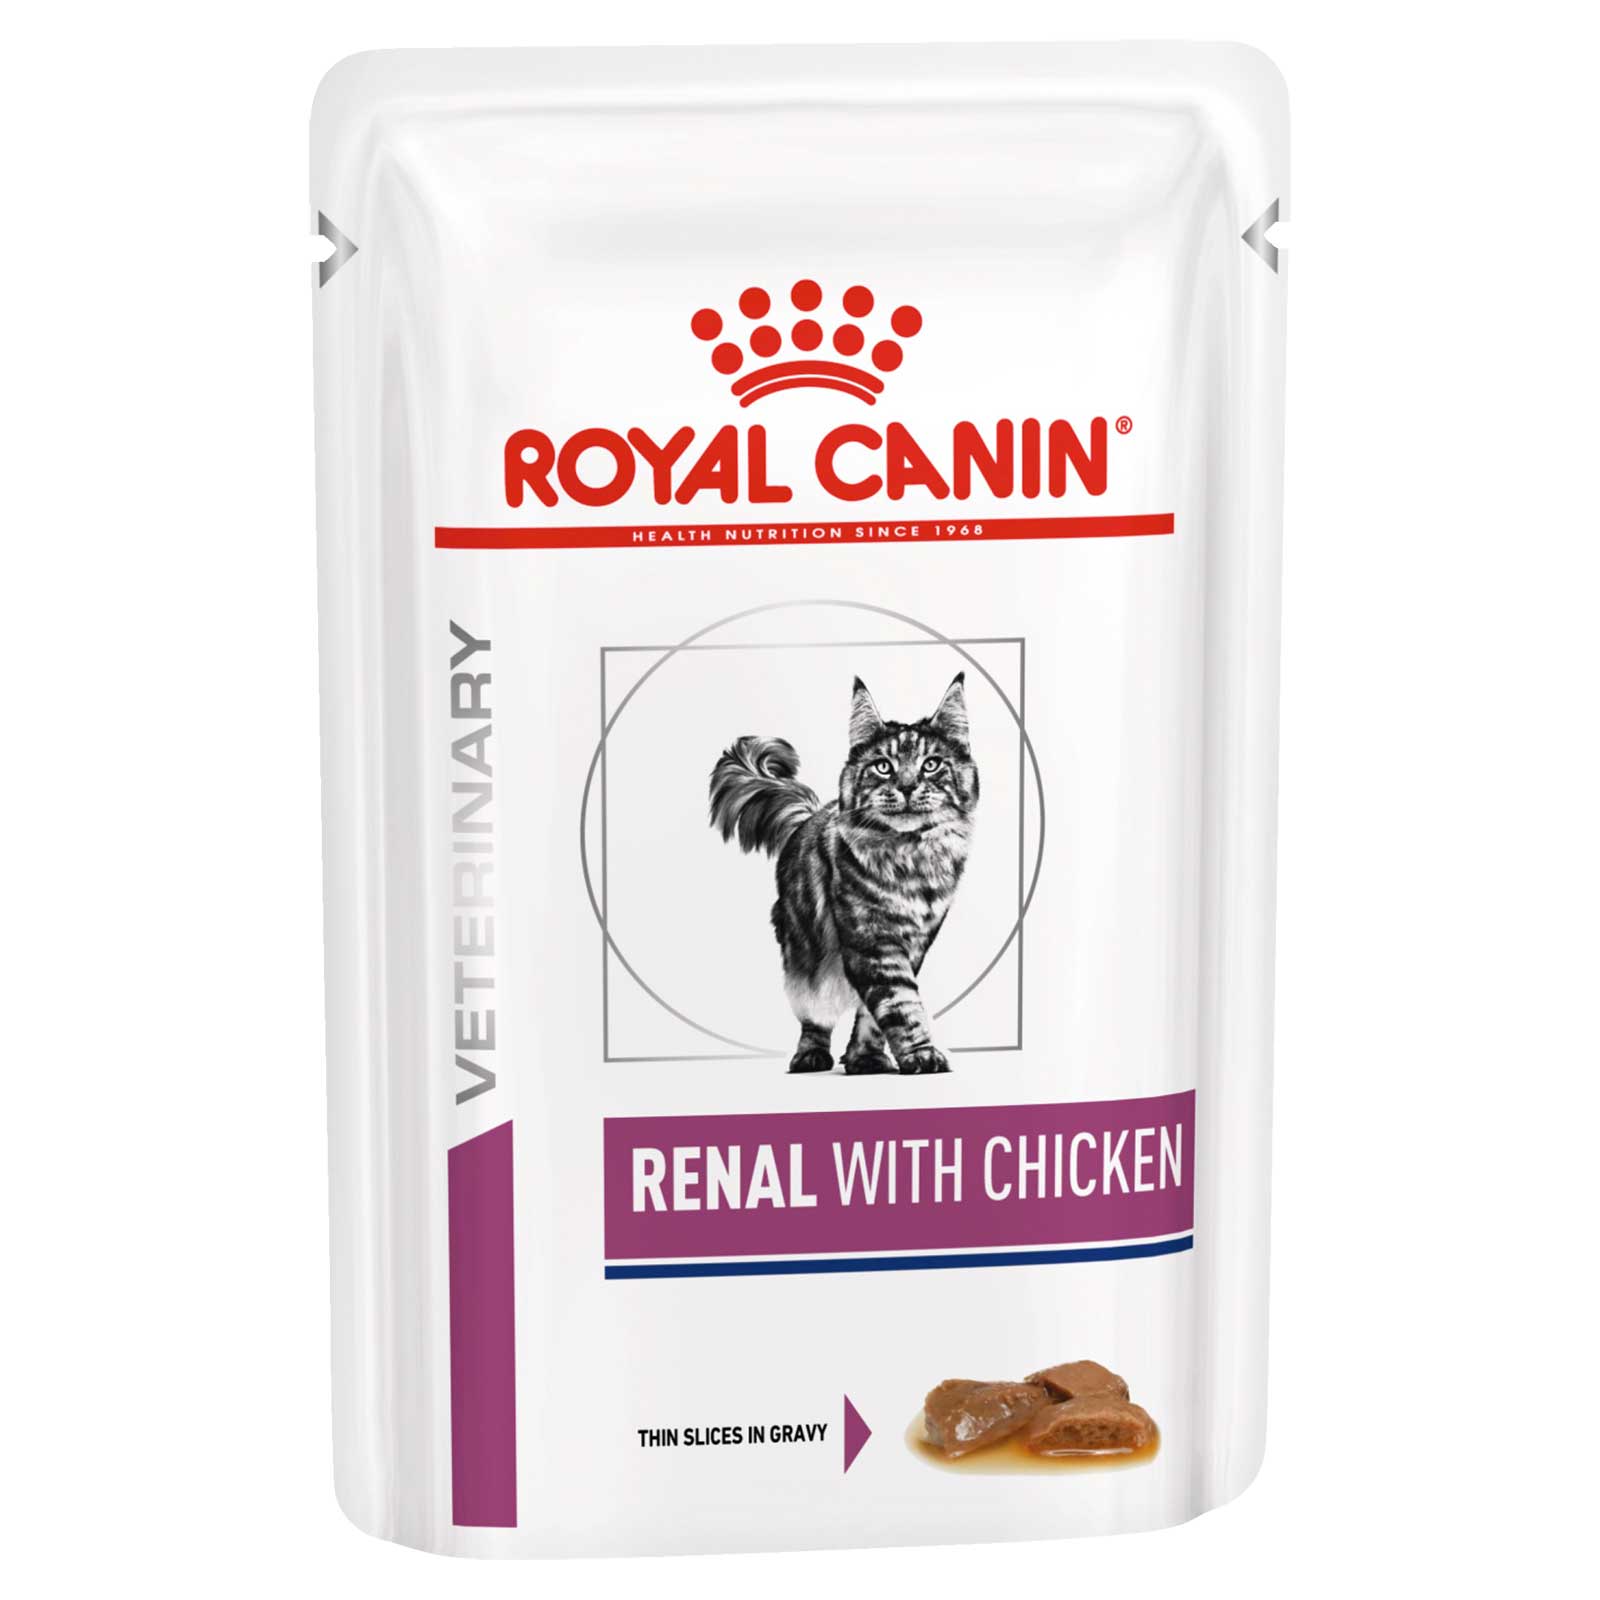 Royal Canin Veterinary Cat Food Pouch Renal with Chicken